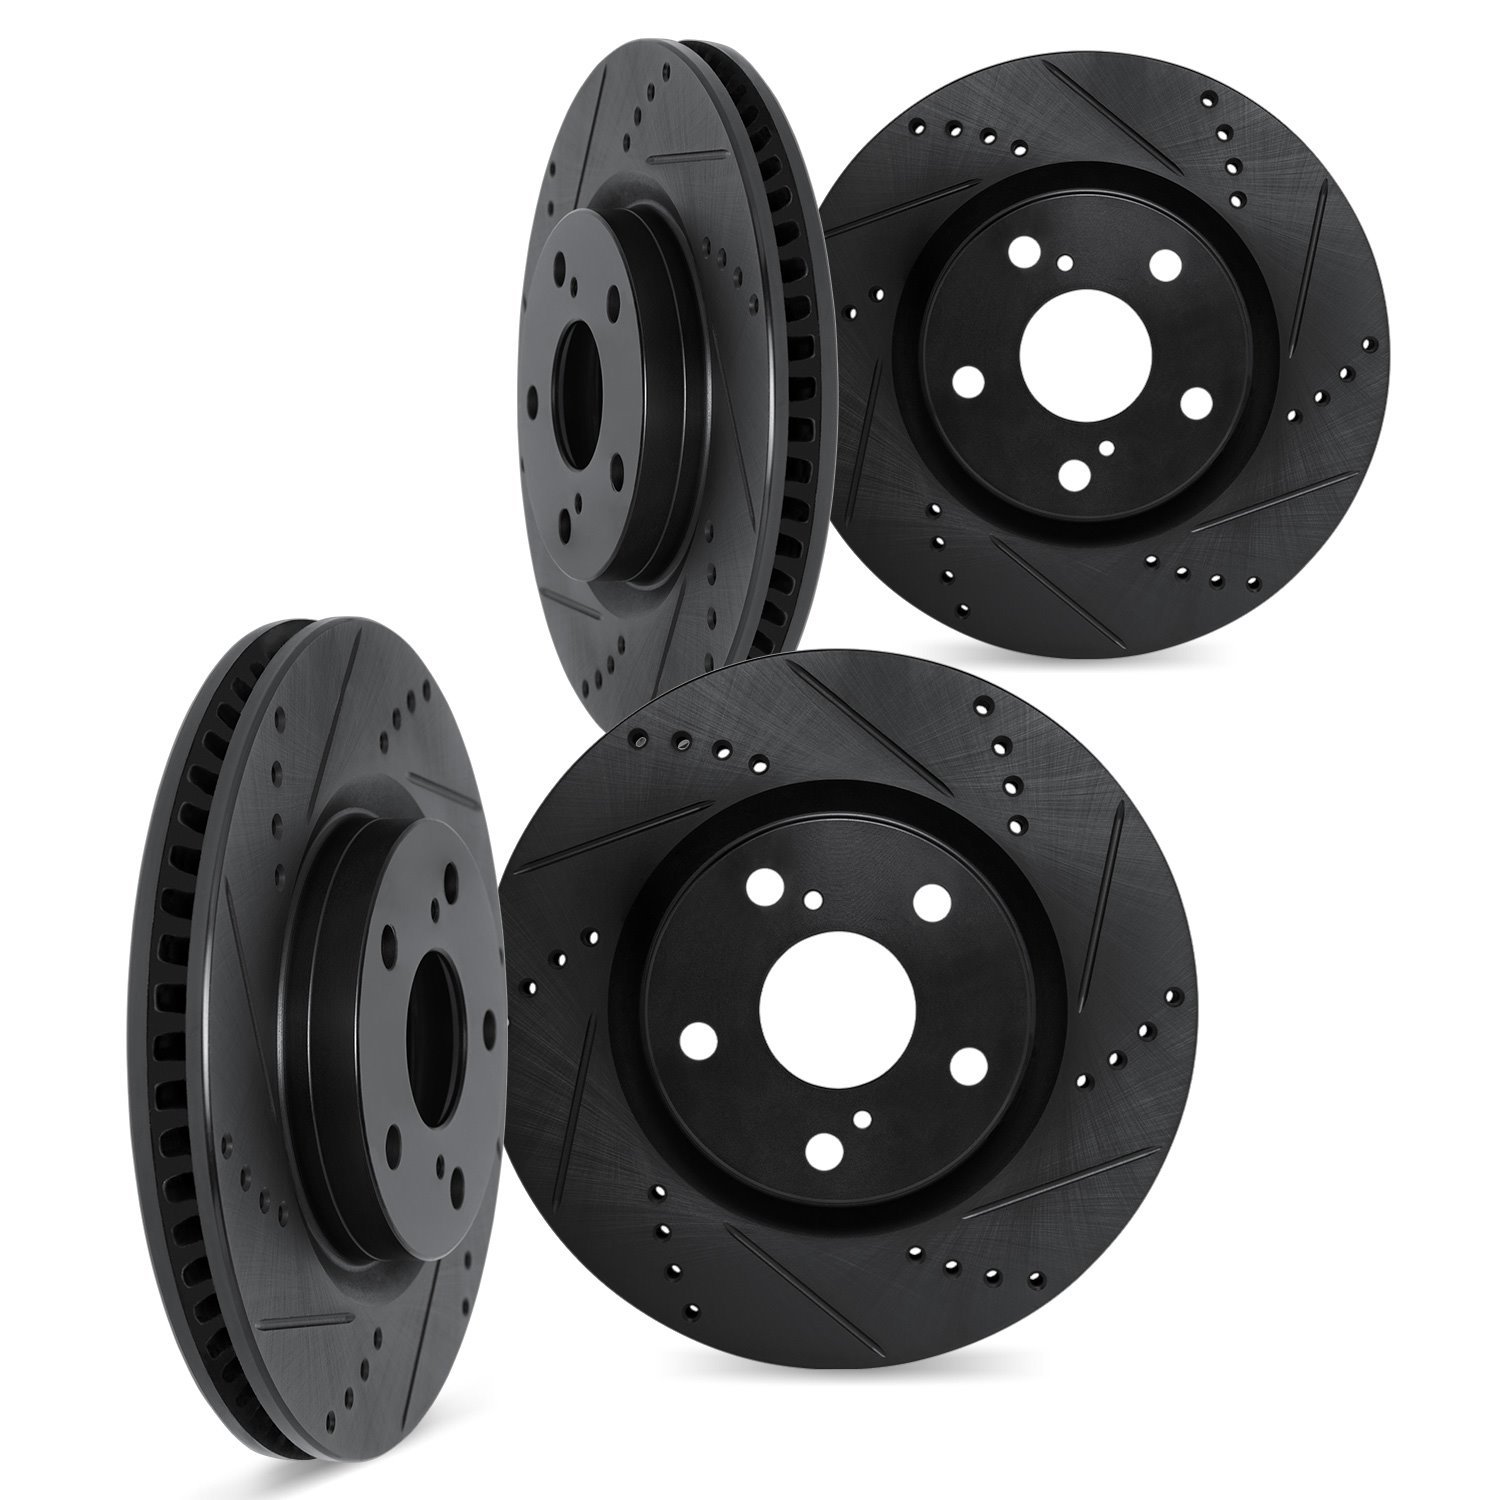 8004-31038 Drilled/Slotted Brake Rotors [Black], Fits Select Multiple Makes/Models, Position: Front and Rear